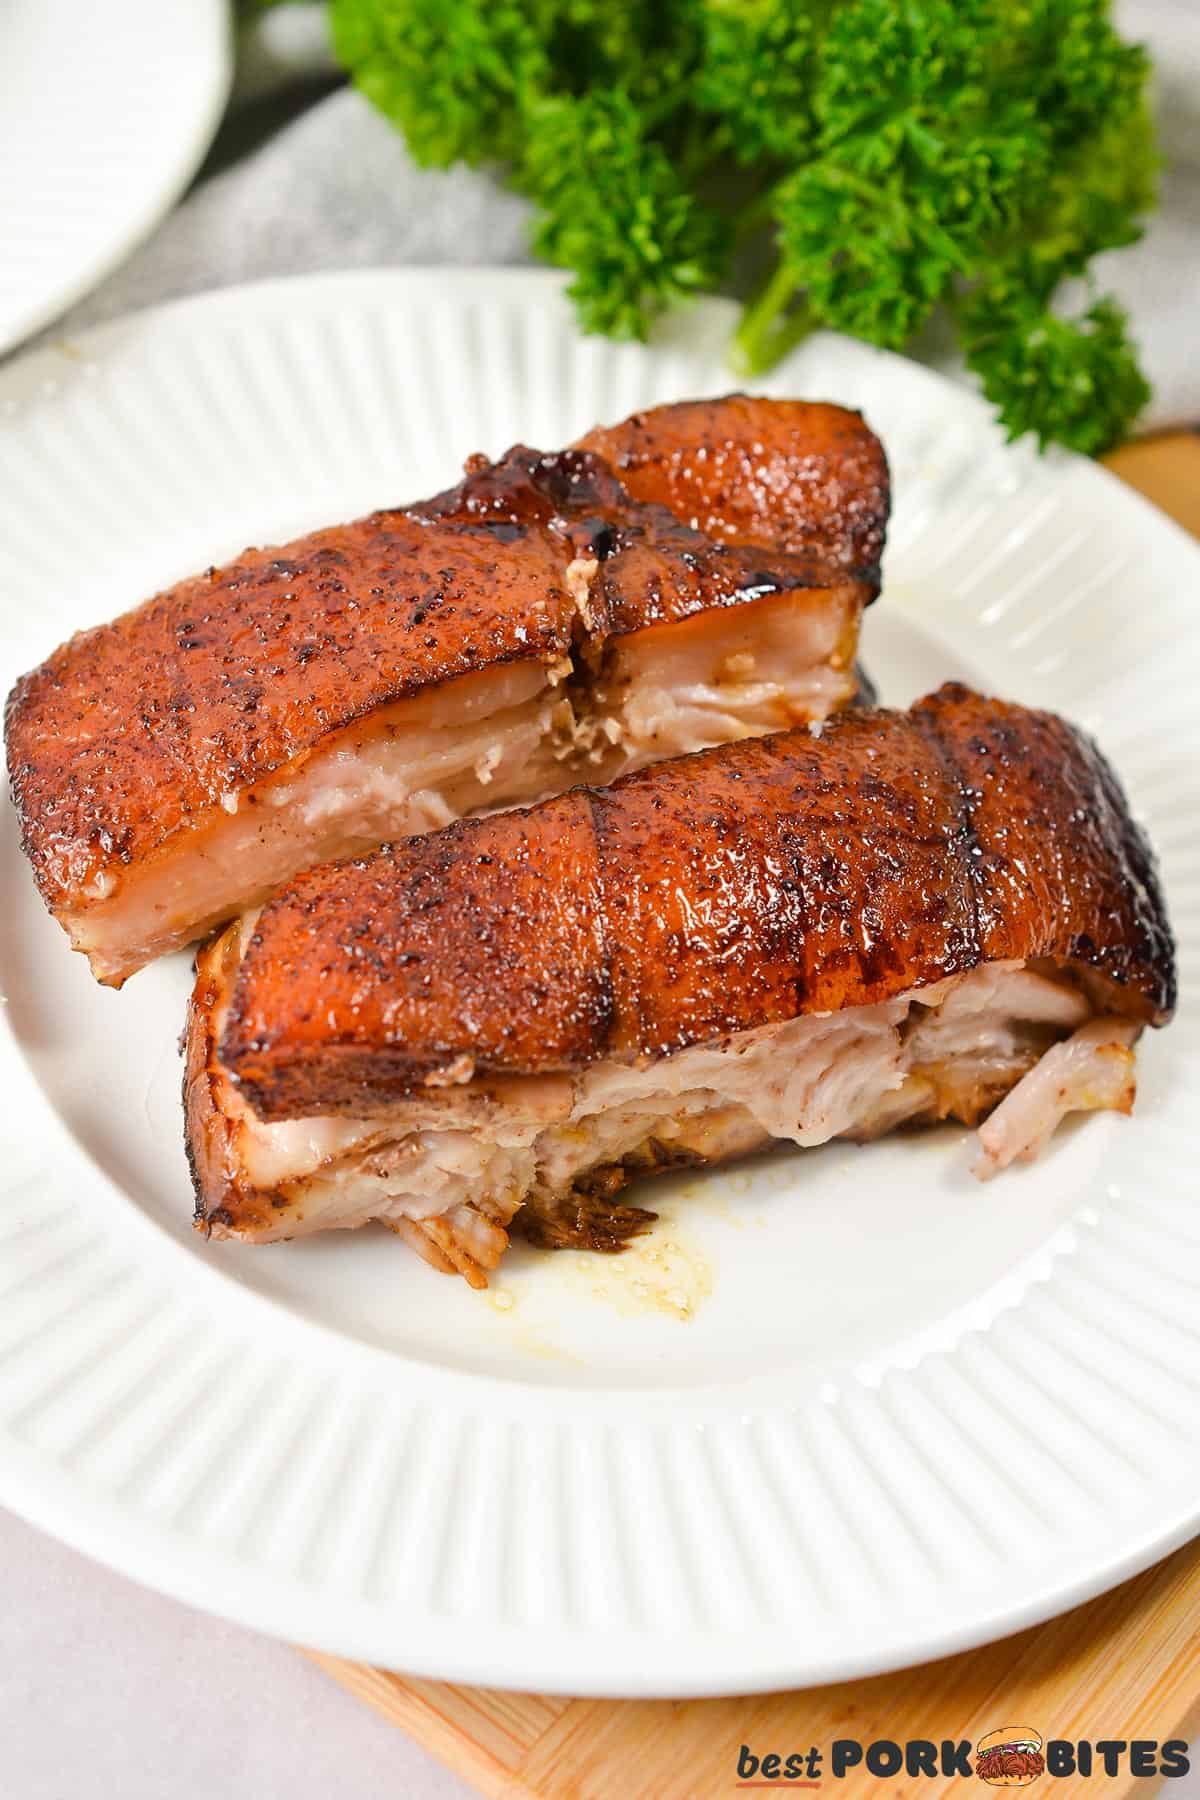 two pieces of roasted pork belly on a white plate